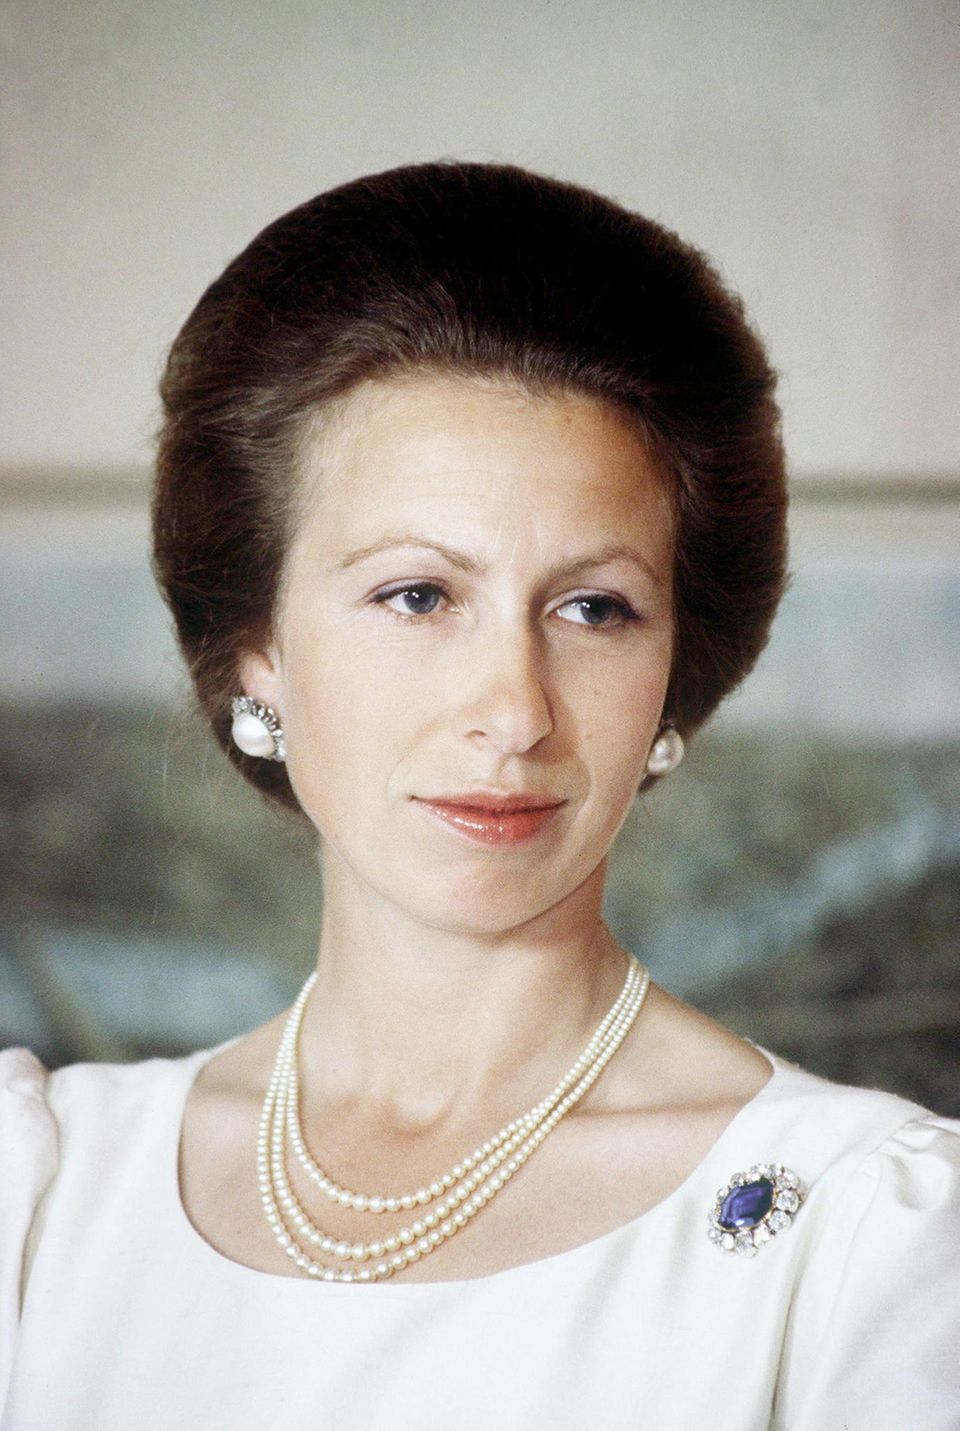 Princess Anne owns a sapphire brooch said to be a copy of Queen Victoria's brooch.  